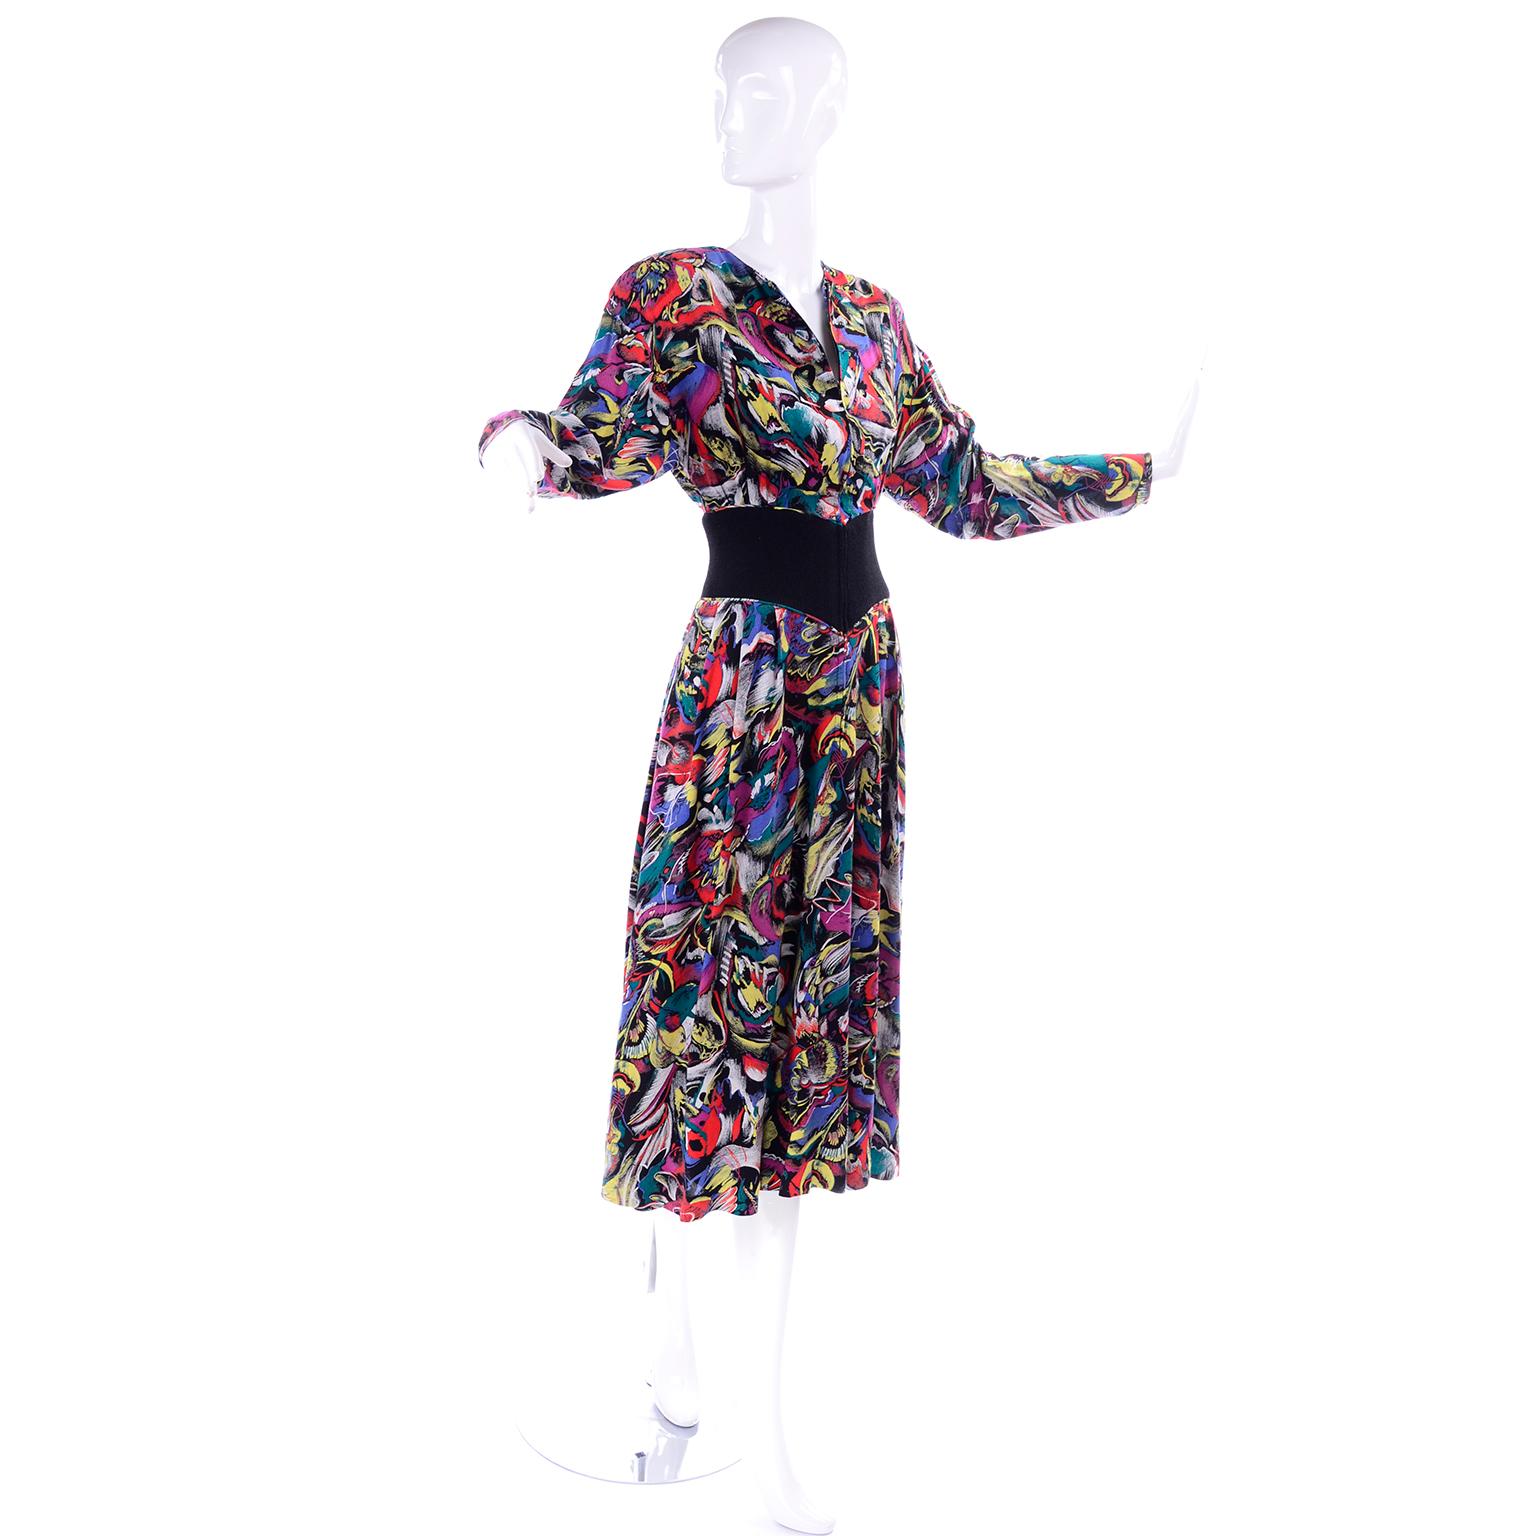 This is a great Hanae Mori 1980's vintage dress in a magenta pink, green, yellow and red artistic abstract design on a black background that looks like chalk! Fully lined with side slit pockets, shoulder pads and drop shoulders. This long sleeve